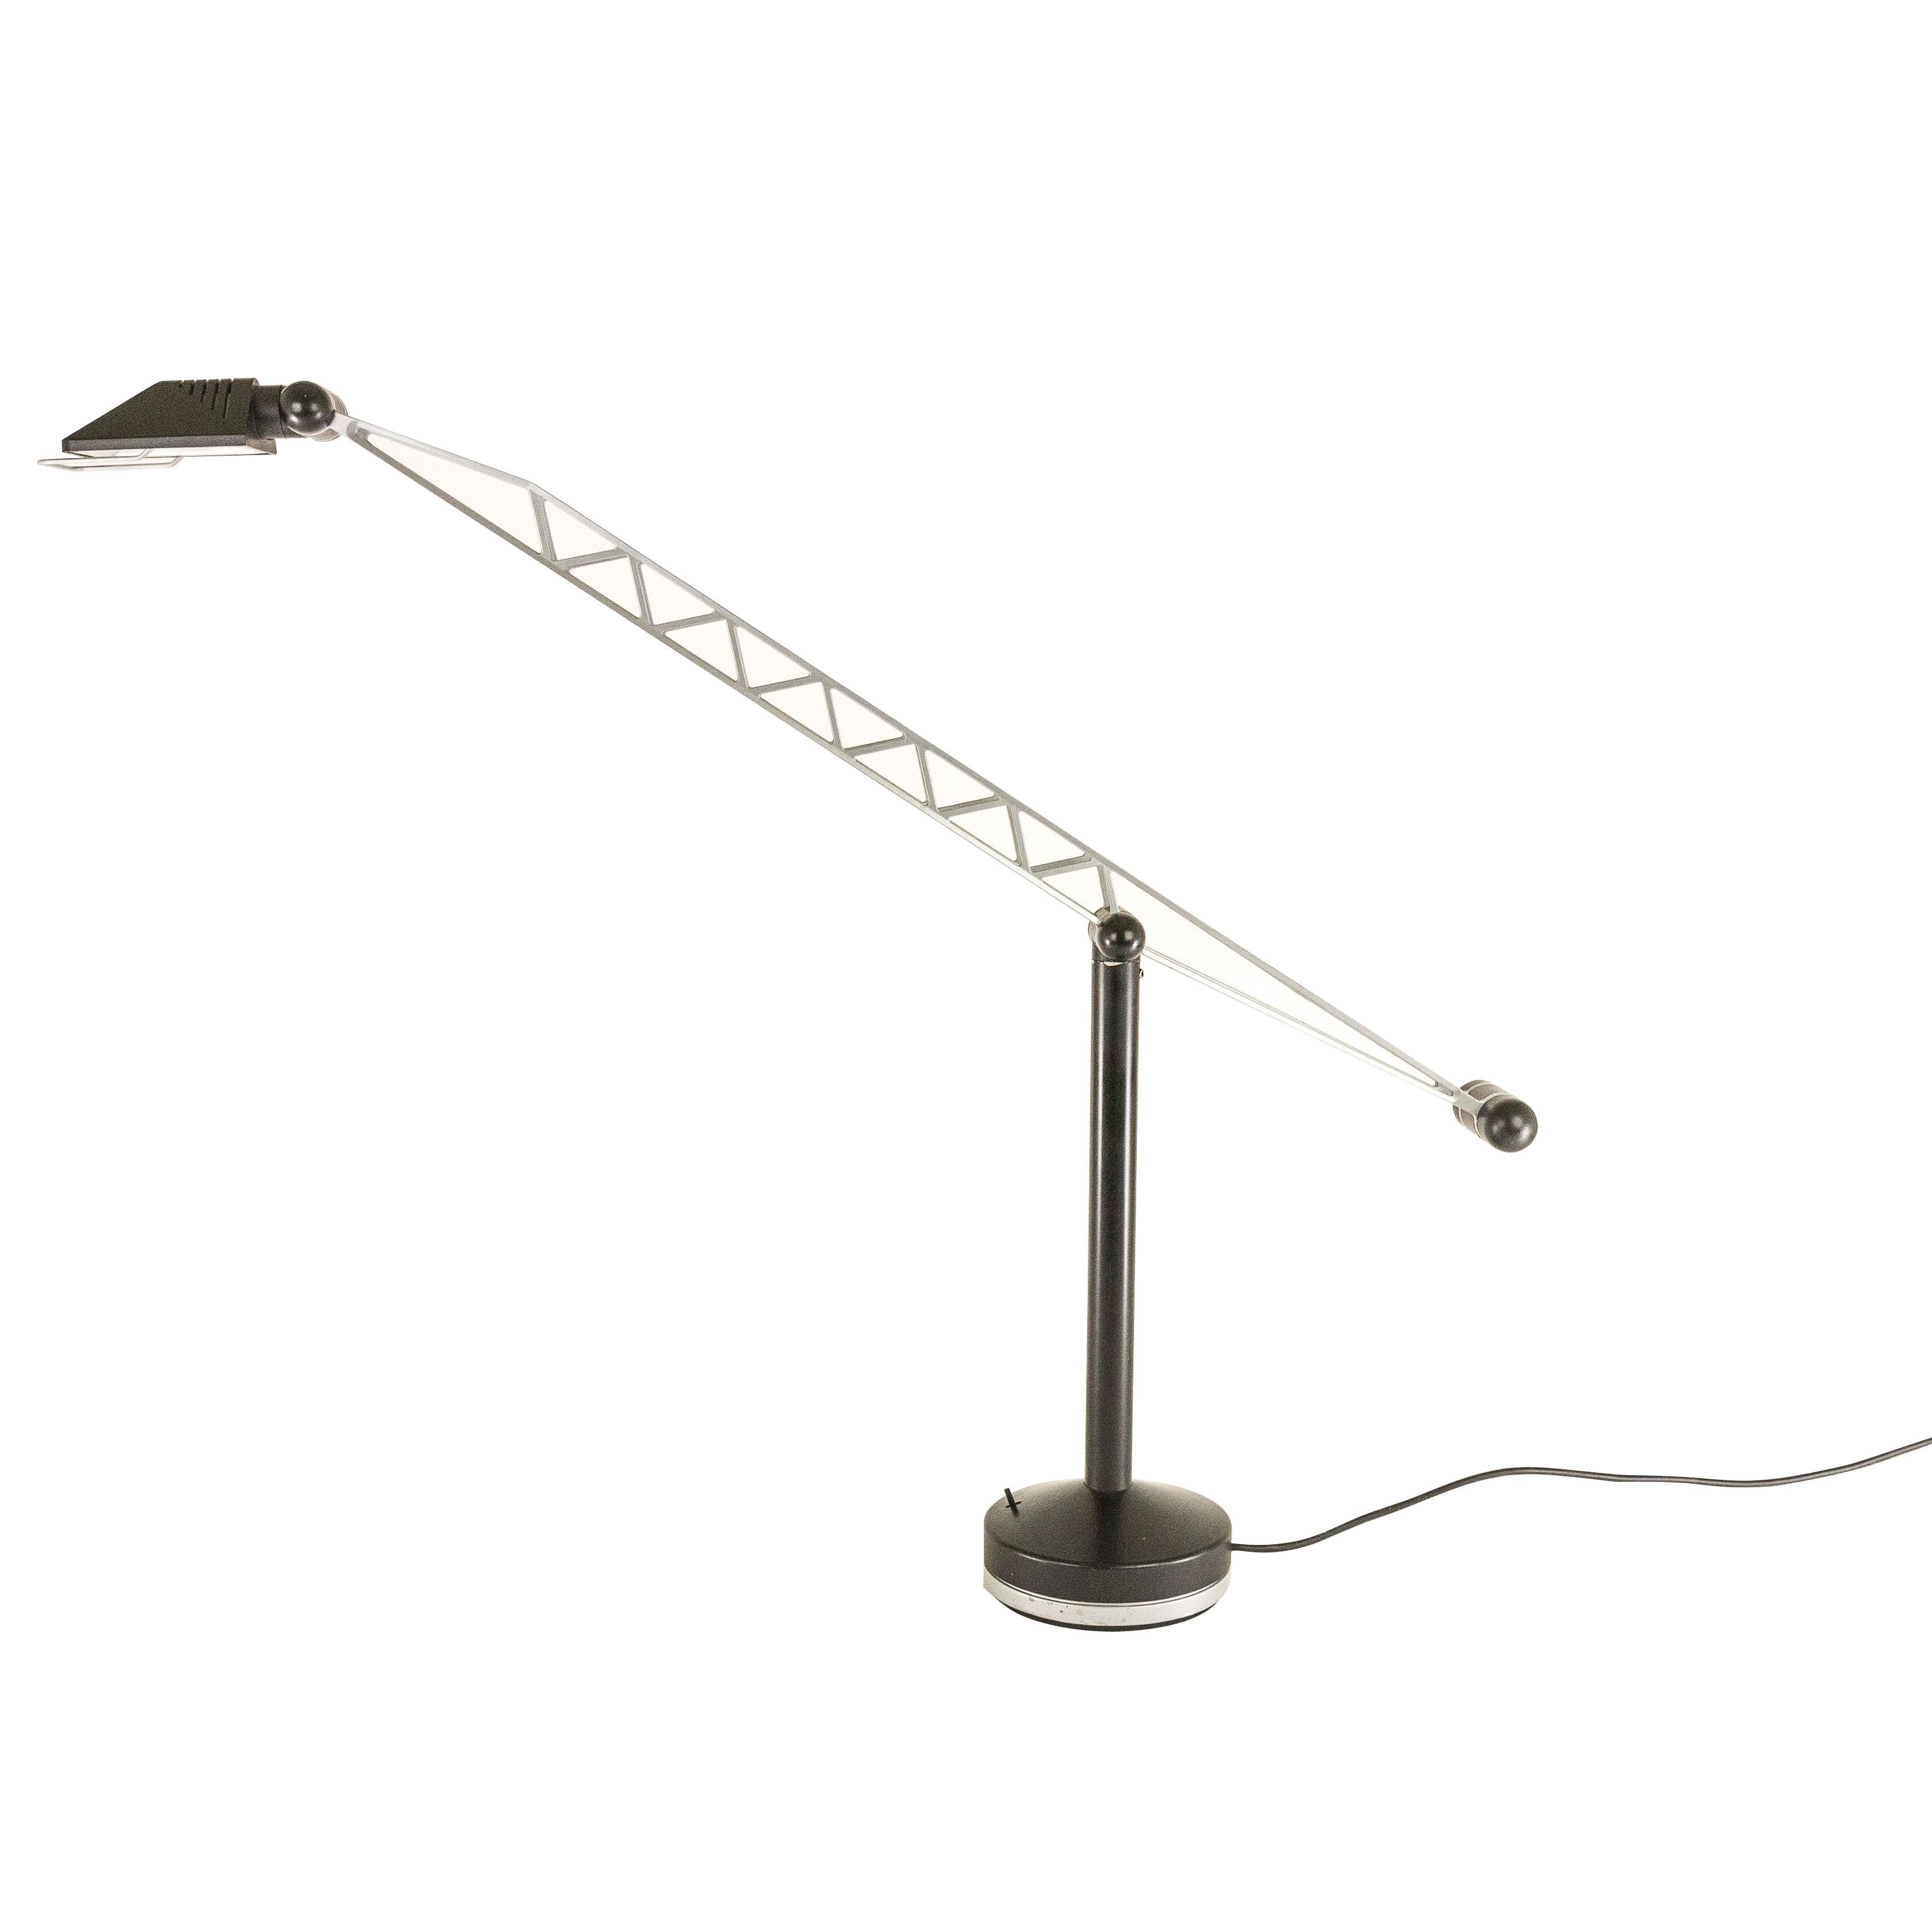 Leader table lamp by Barbieri & Marianelli for Tronconi, 1980s